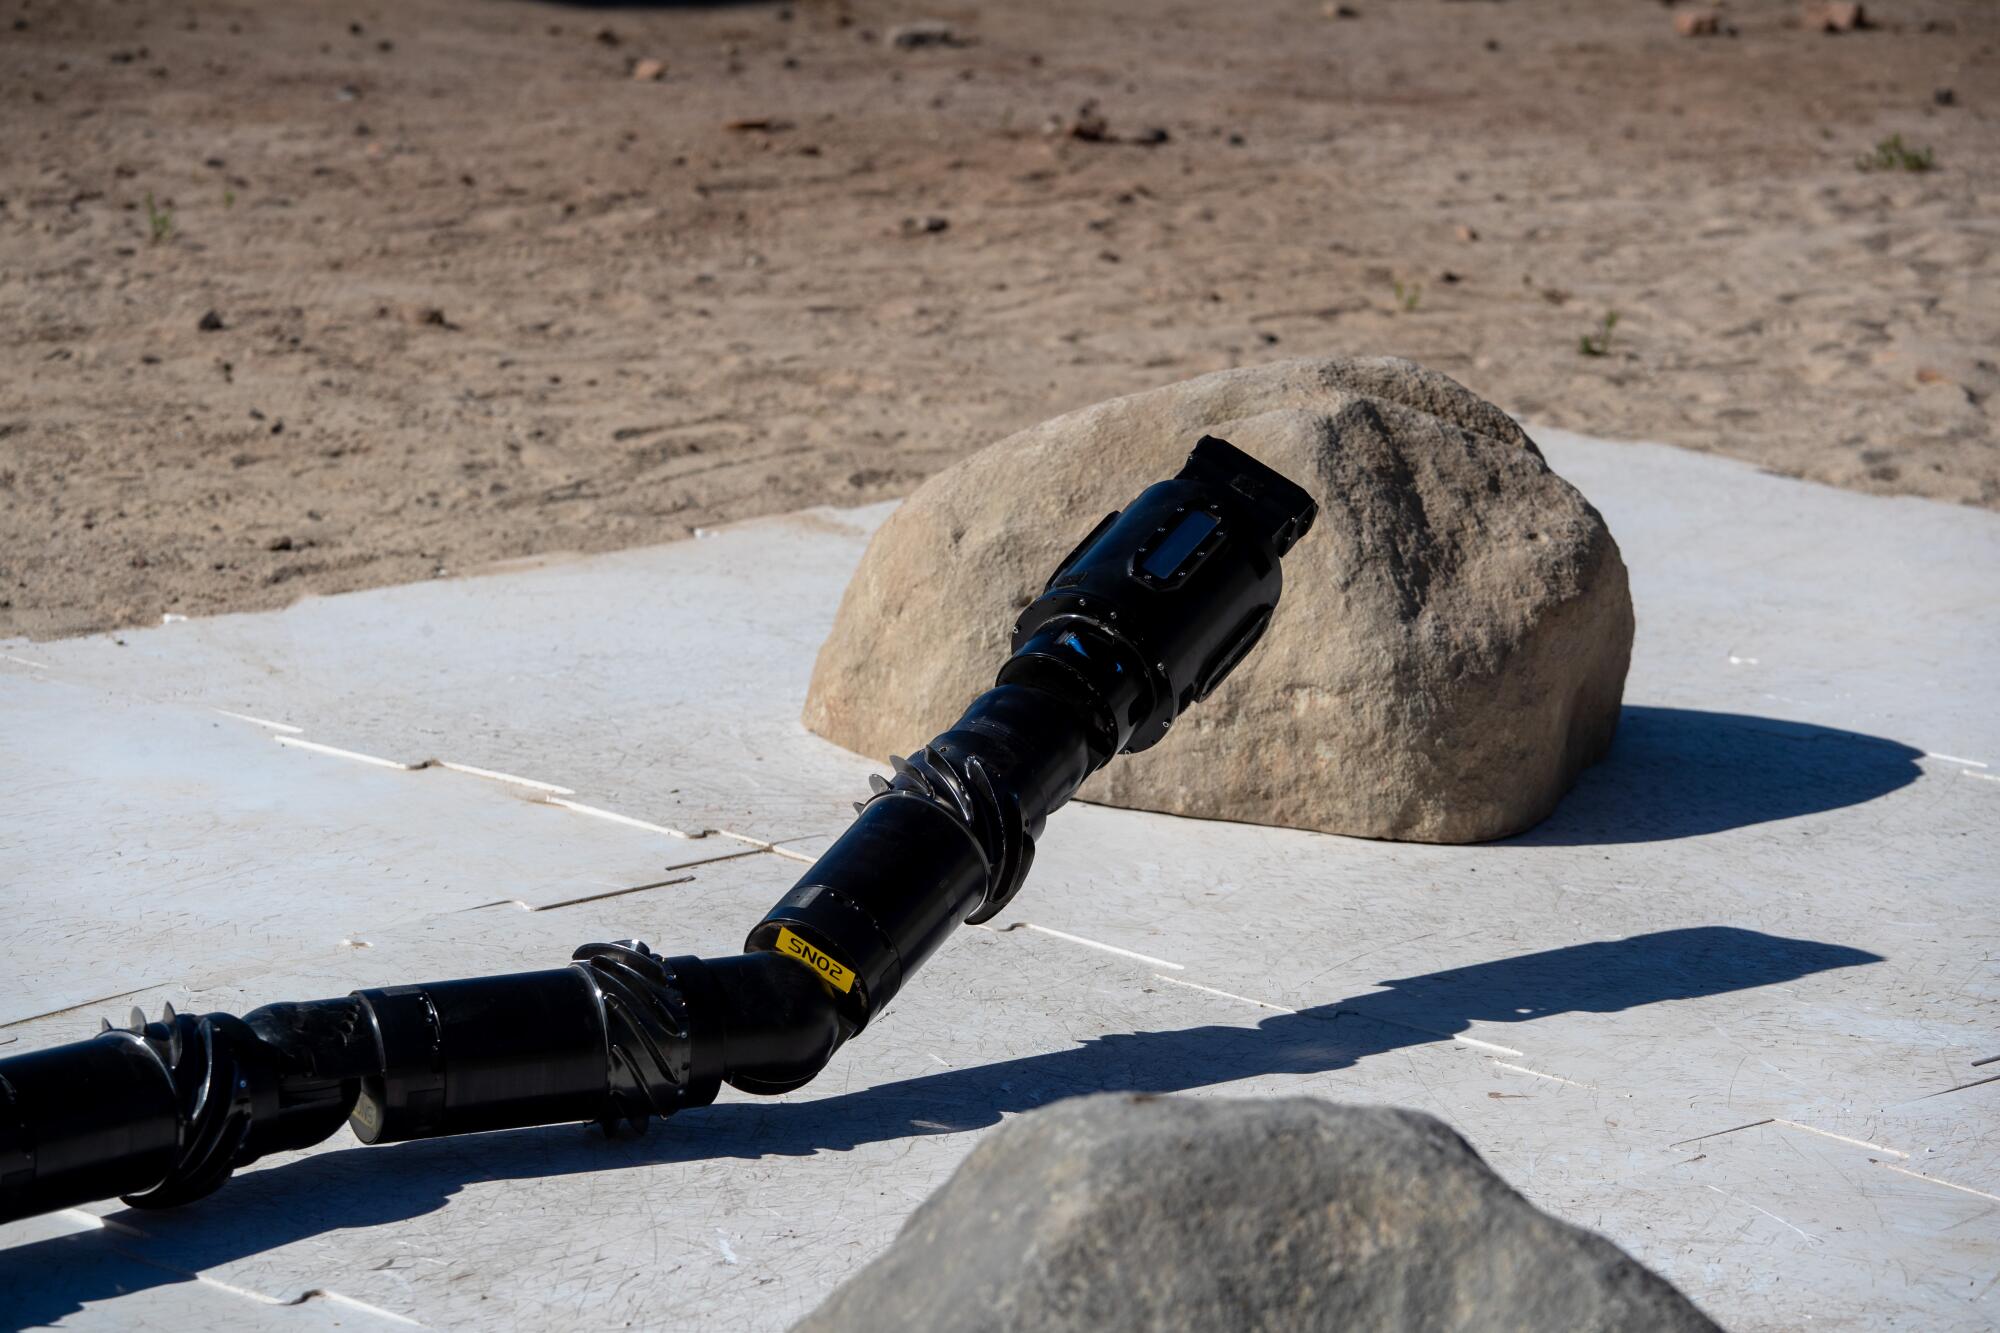 A long, black object lifts its front part between two rocks.